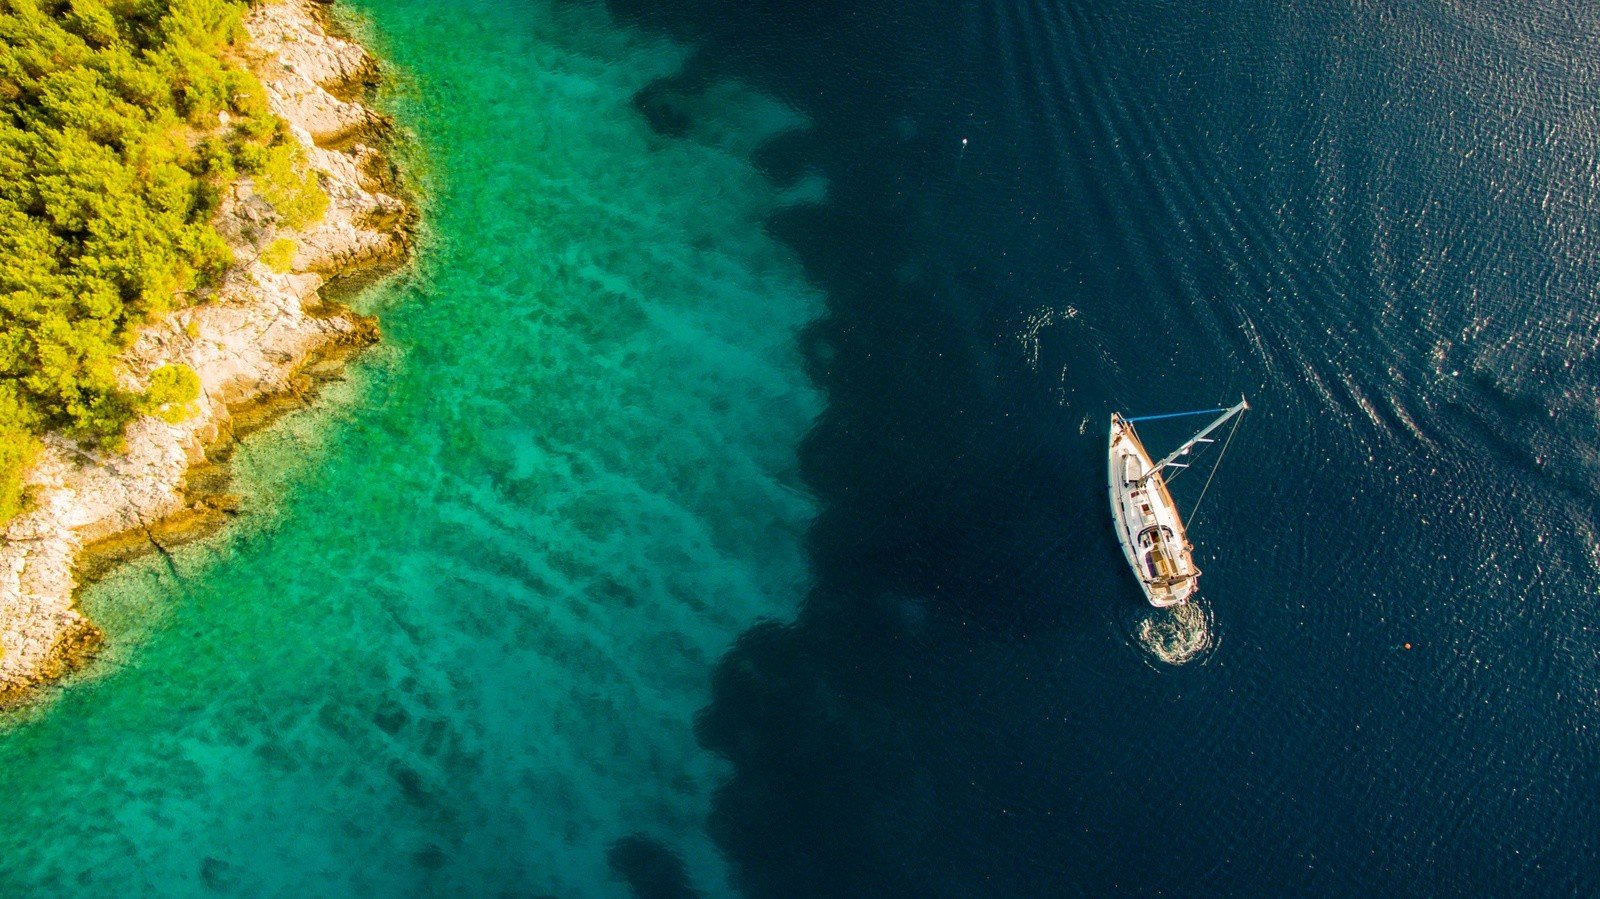 A yacht offshore of an island in Croatia, taken from above.